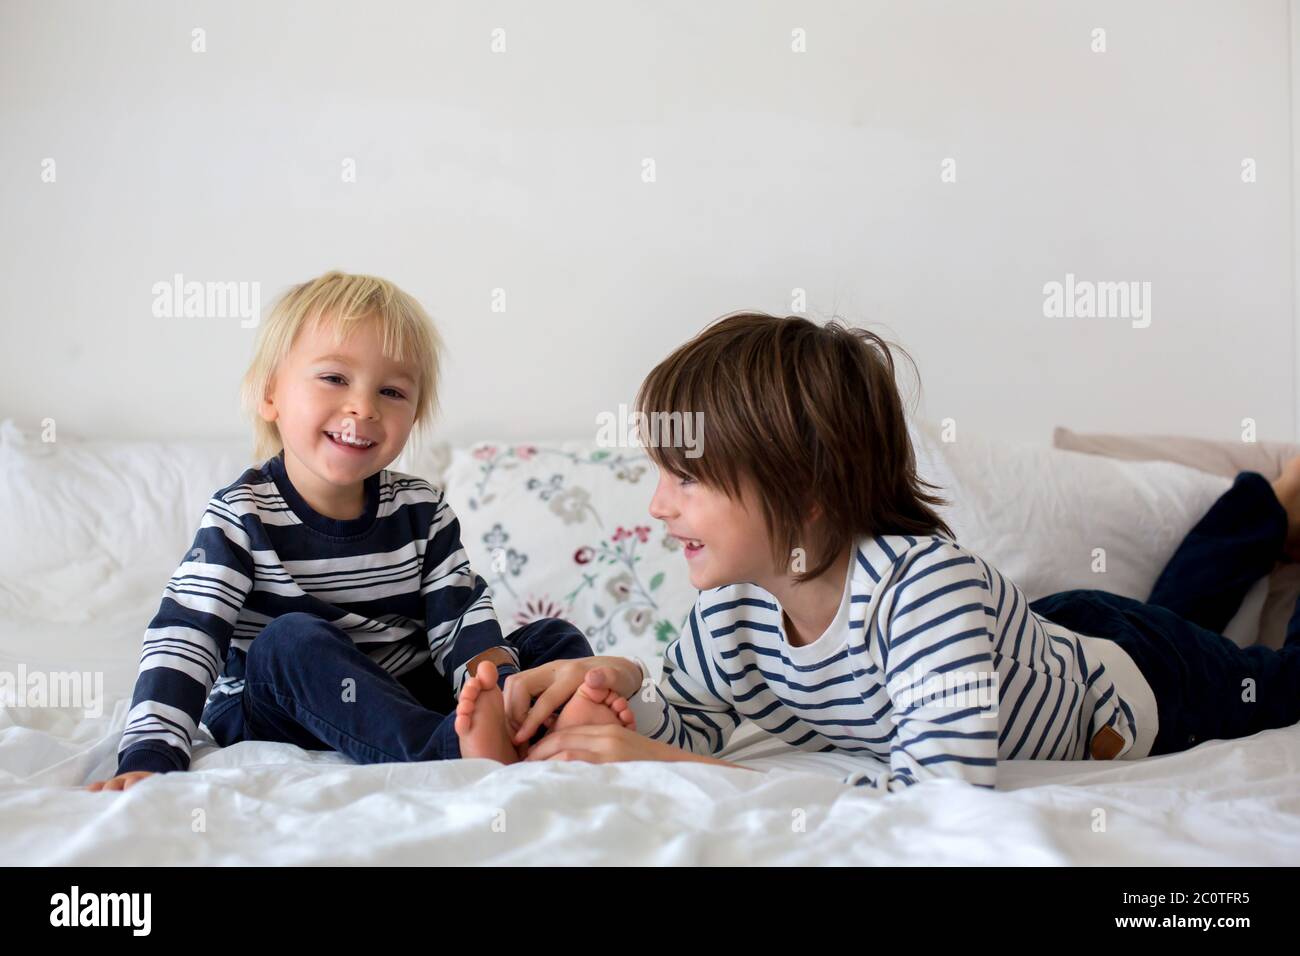 Children, brothers, playing at home, tickling feet laughing and smiling Stock Photo